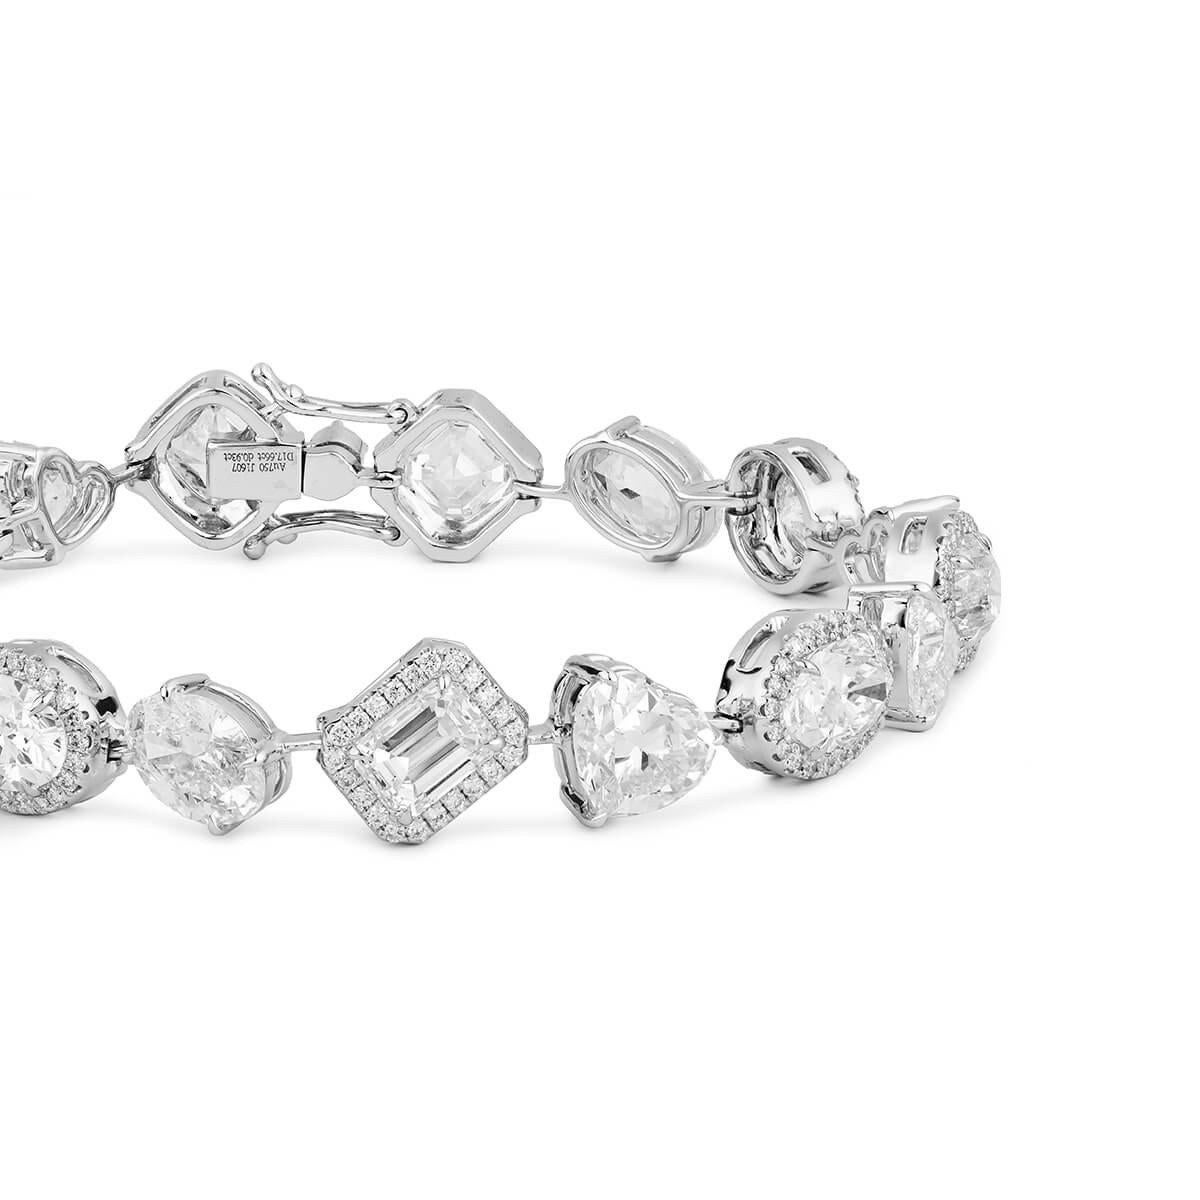 MIXED CUT DIAMOND BRACELET - 18.59 CT


Set in 18KT White gold


Total diamond weight: 18.59 ct
[ 208 diamonds ]
Color: F-J
Clarity: VVS1 - SI2

All 18 diamonds are GIA Certified


Total bracelet weight: 18.51 grams

